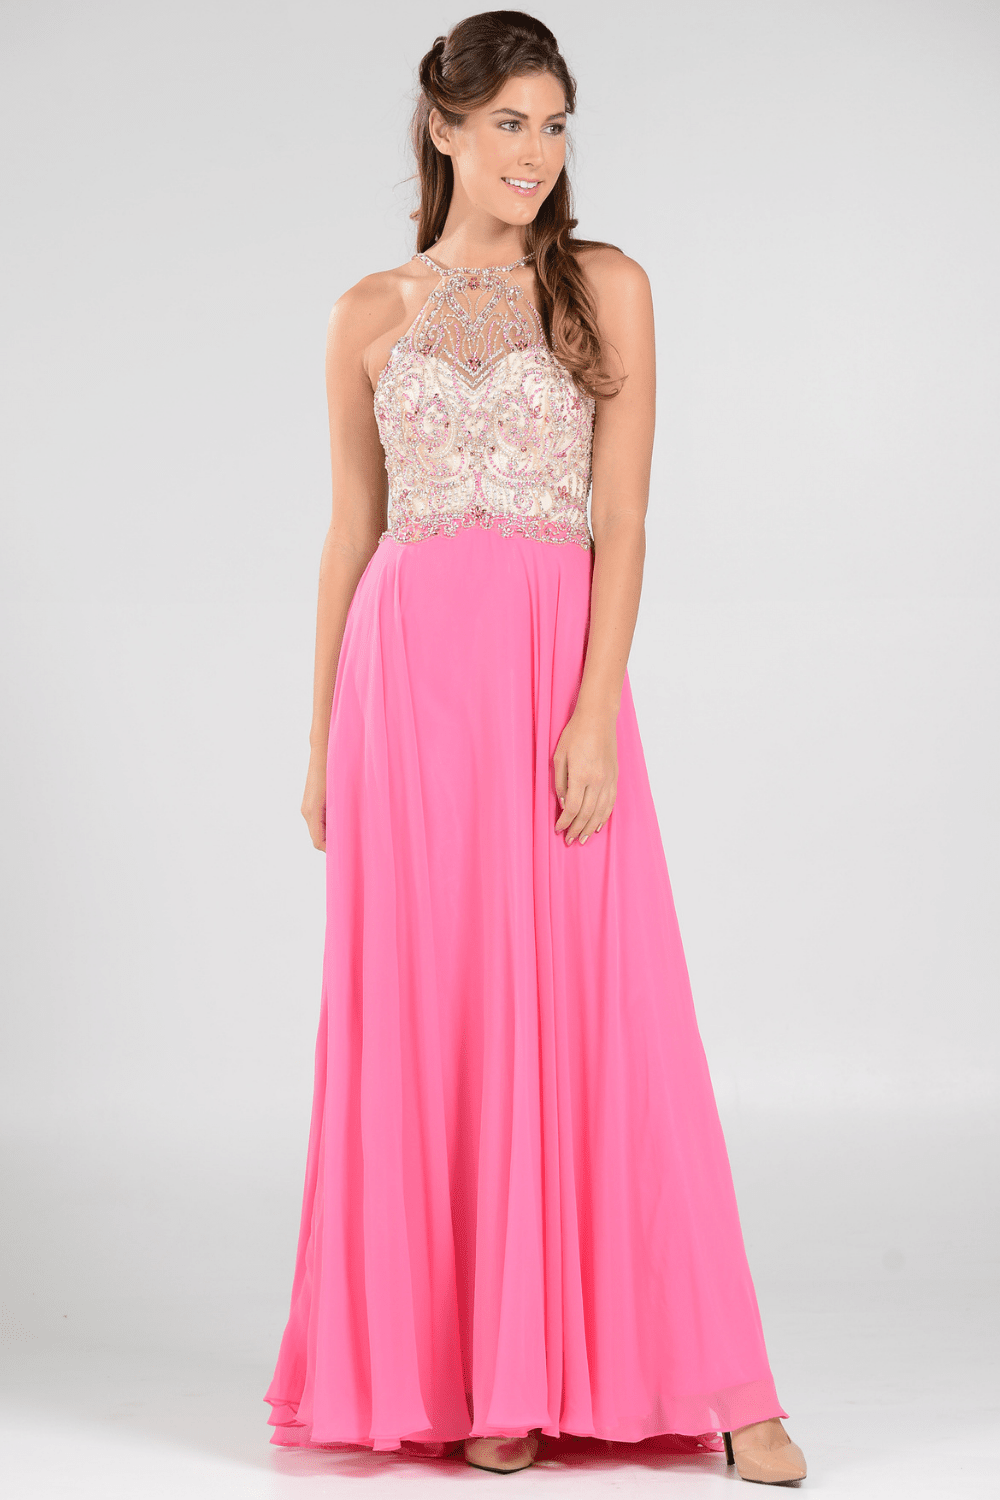 Long High Neck Dress with Beaded Illusion Bodice by Poly USA 7826